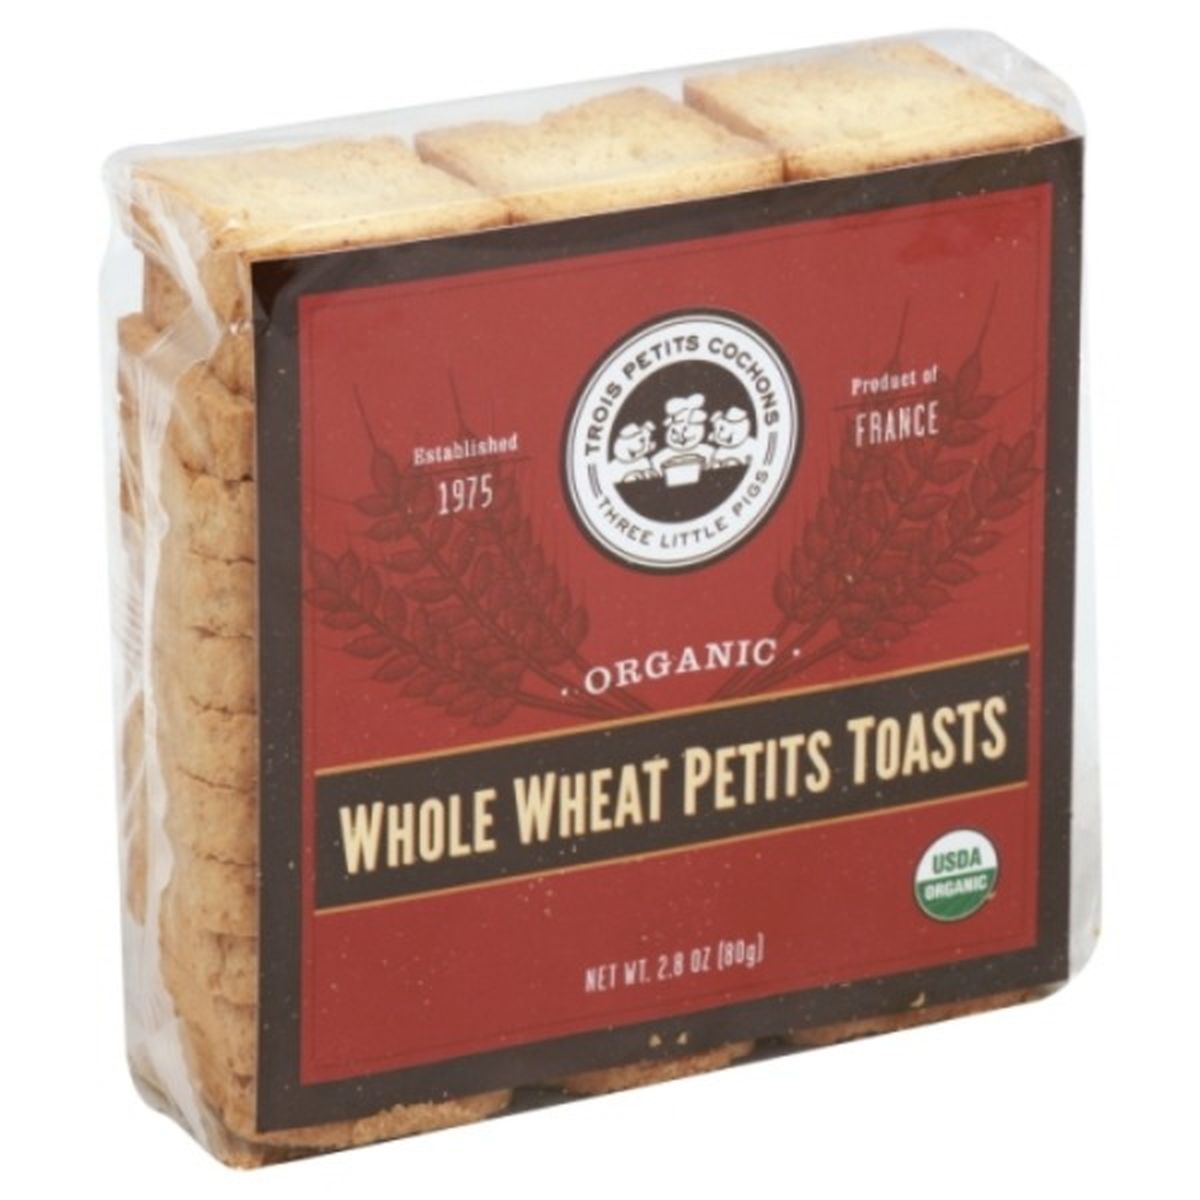 Calories in Les Trois Petits Cochons Petits Toasts, Organic, Whole Wheat